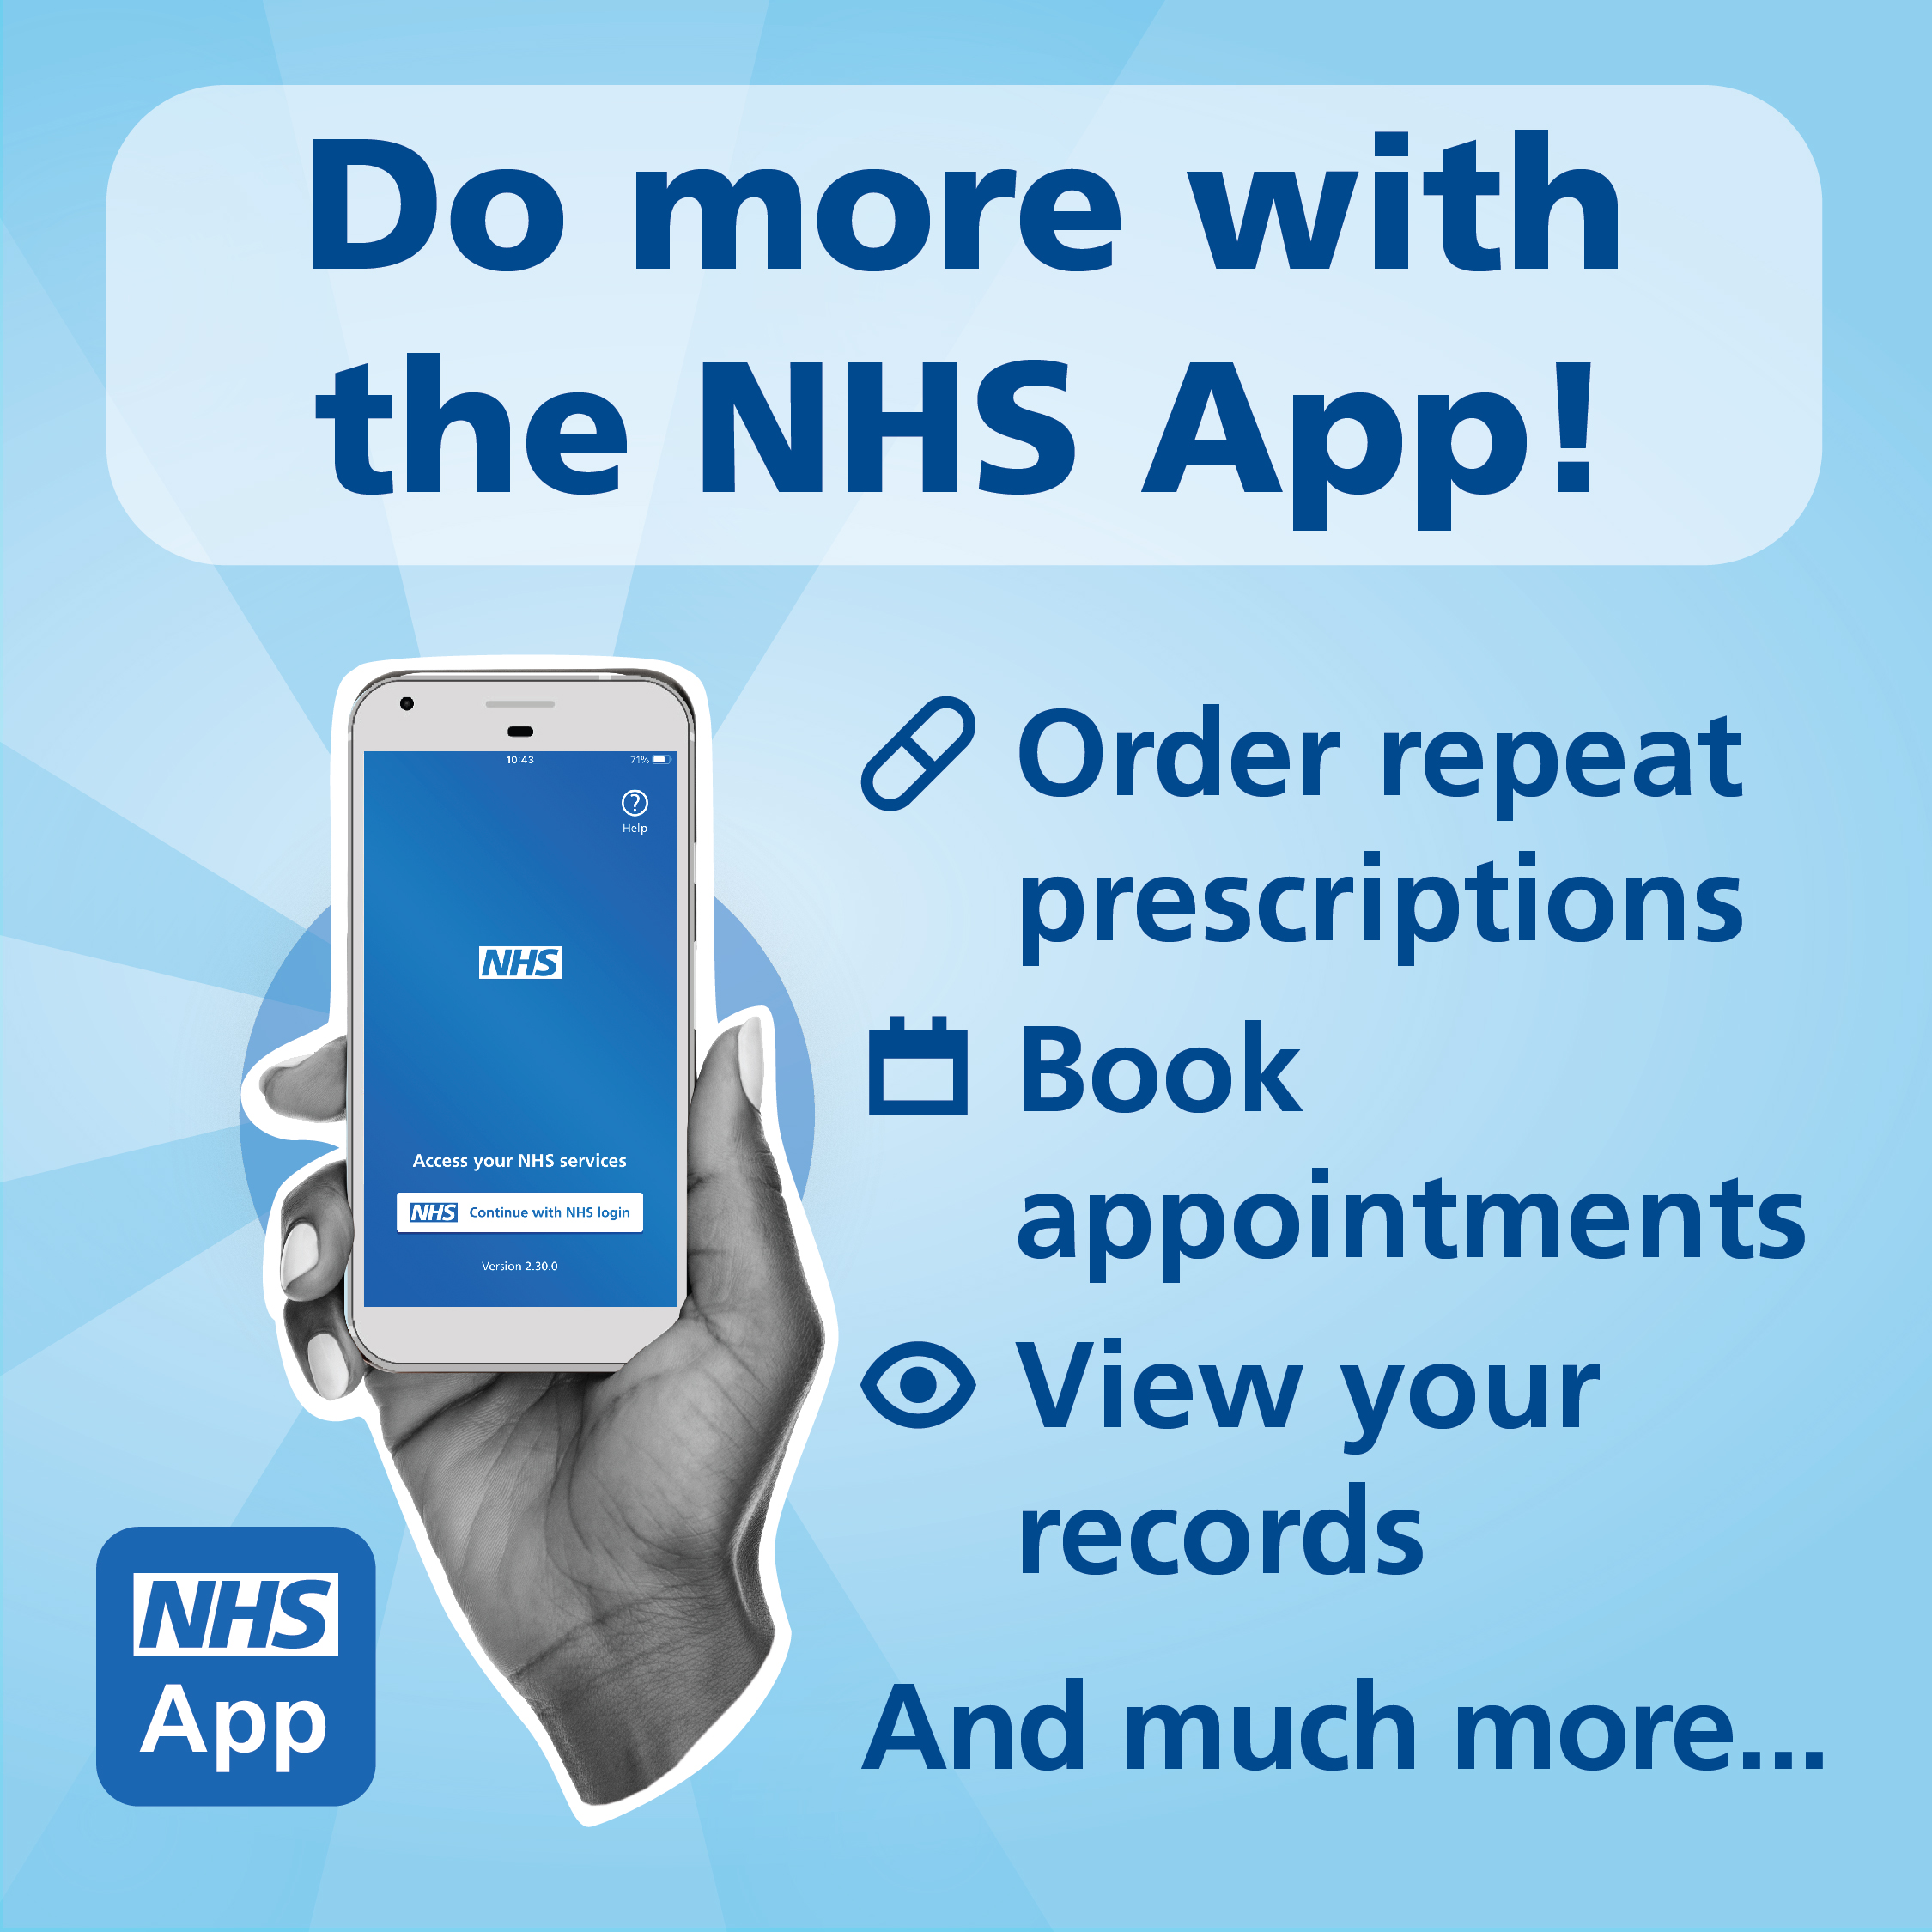 Do more with the NHS App - order repeat prescriptions, book appointments, view your records and more